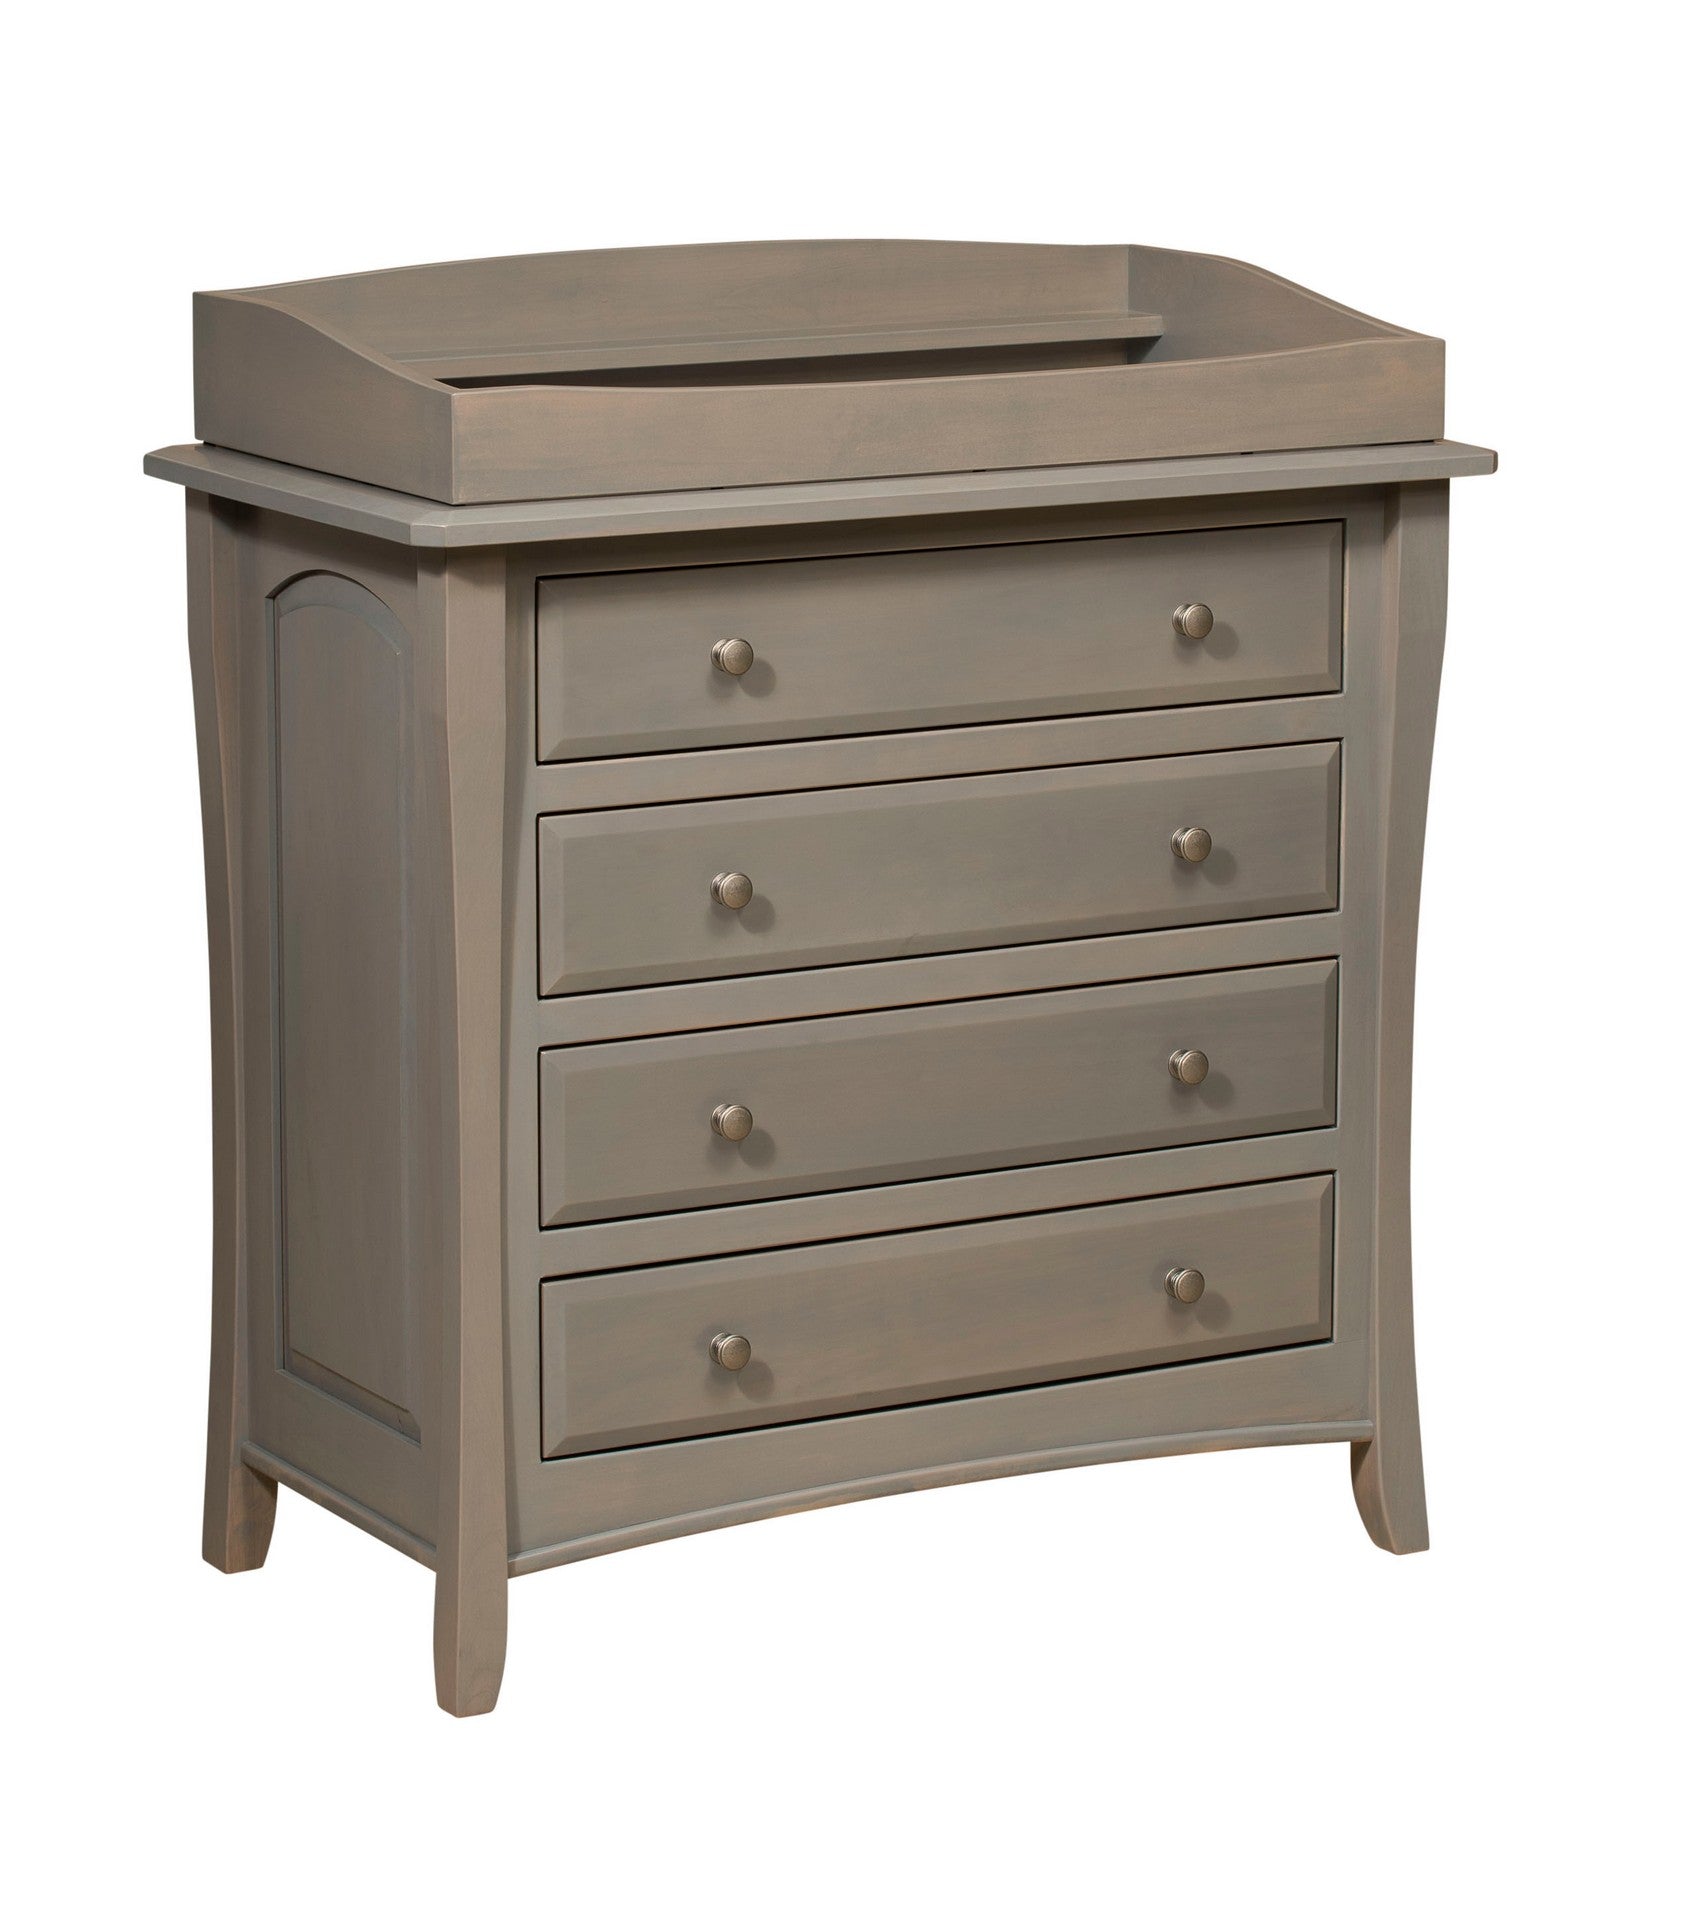 berkley four drawer dresser with changing box in brown maple with north star wipe finish